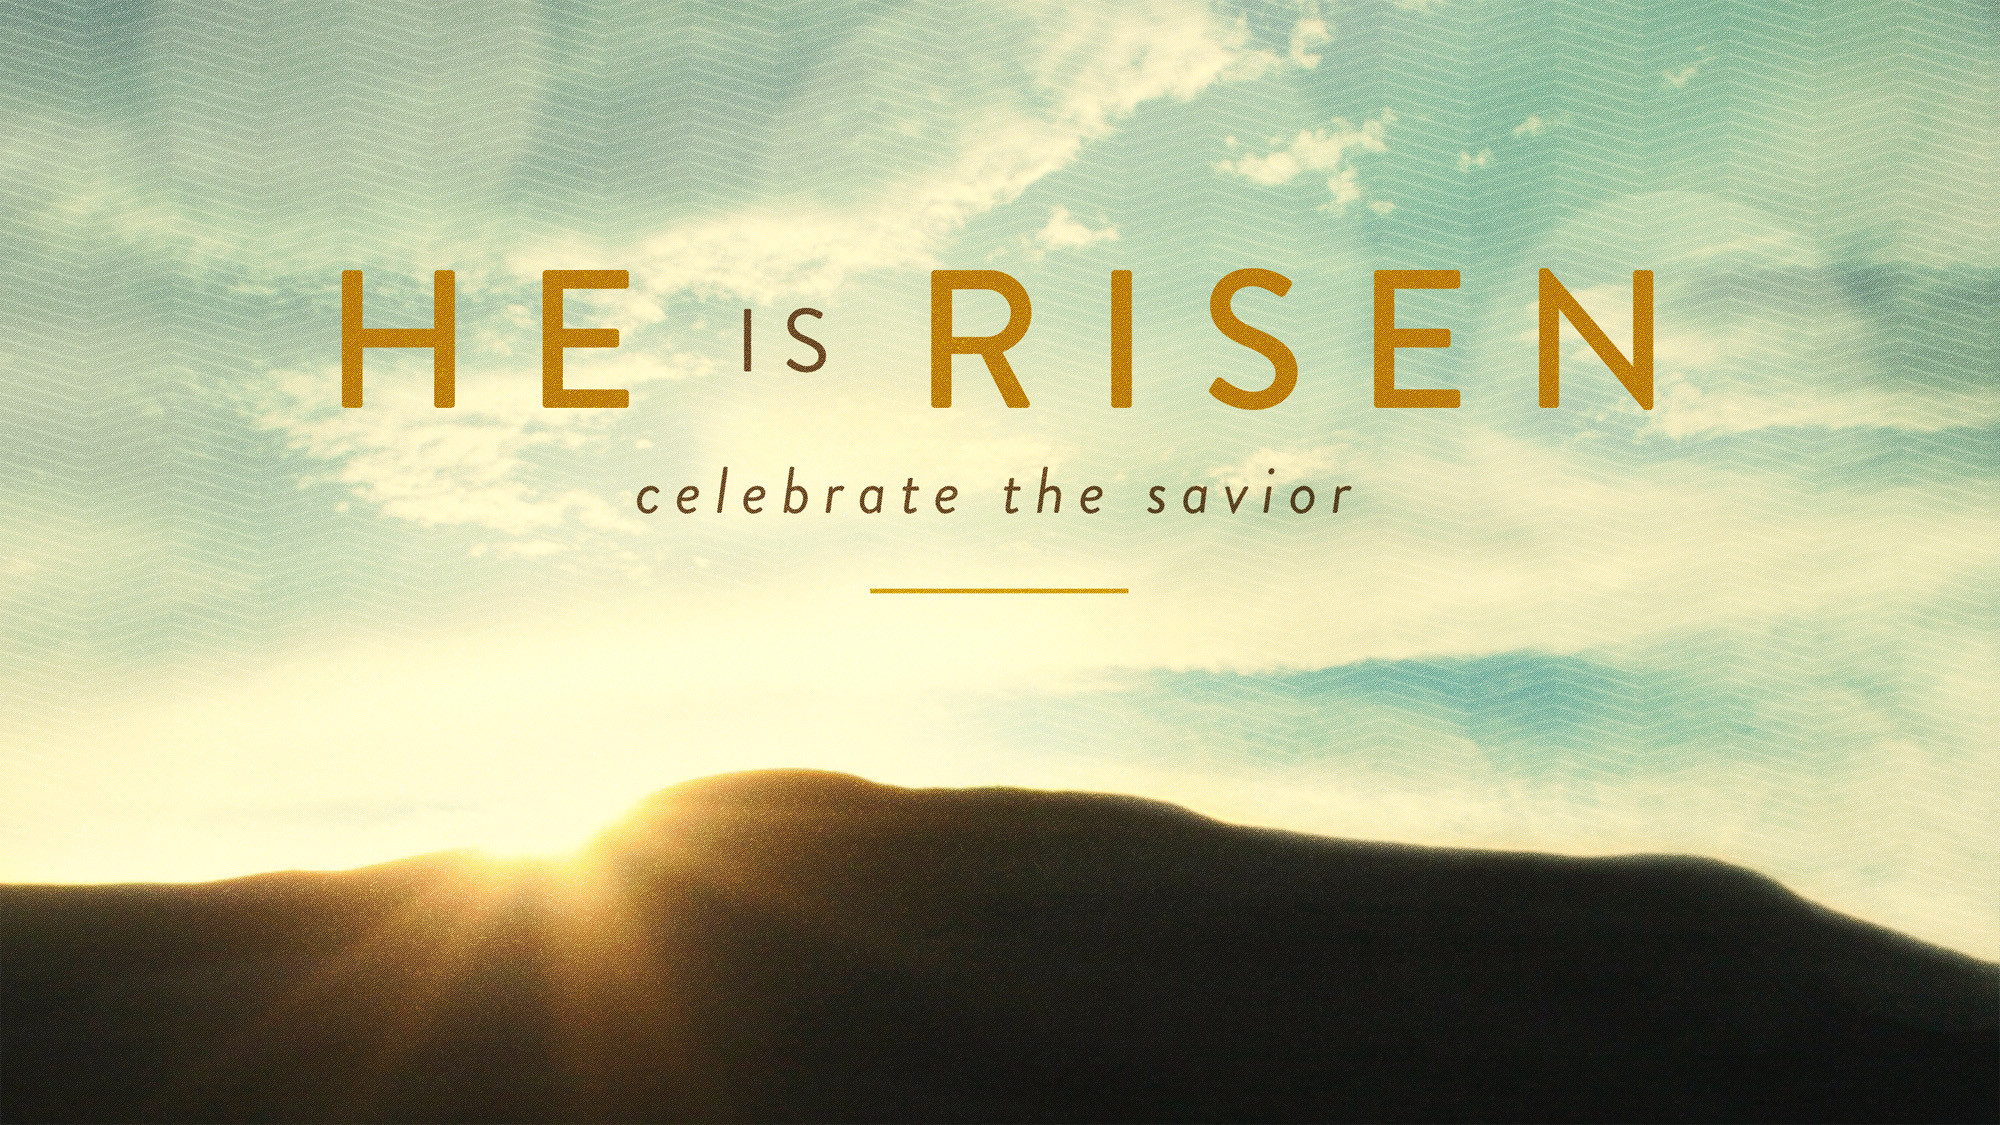 Easter He Has Risen Quotes
 He Is Risen Easter Quotes For QuotesGram